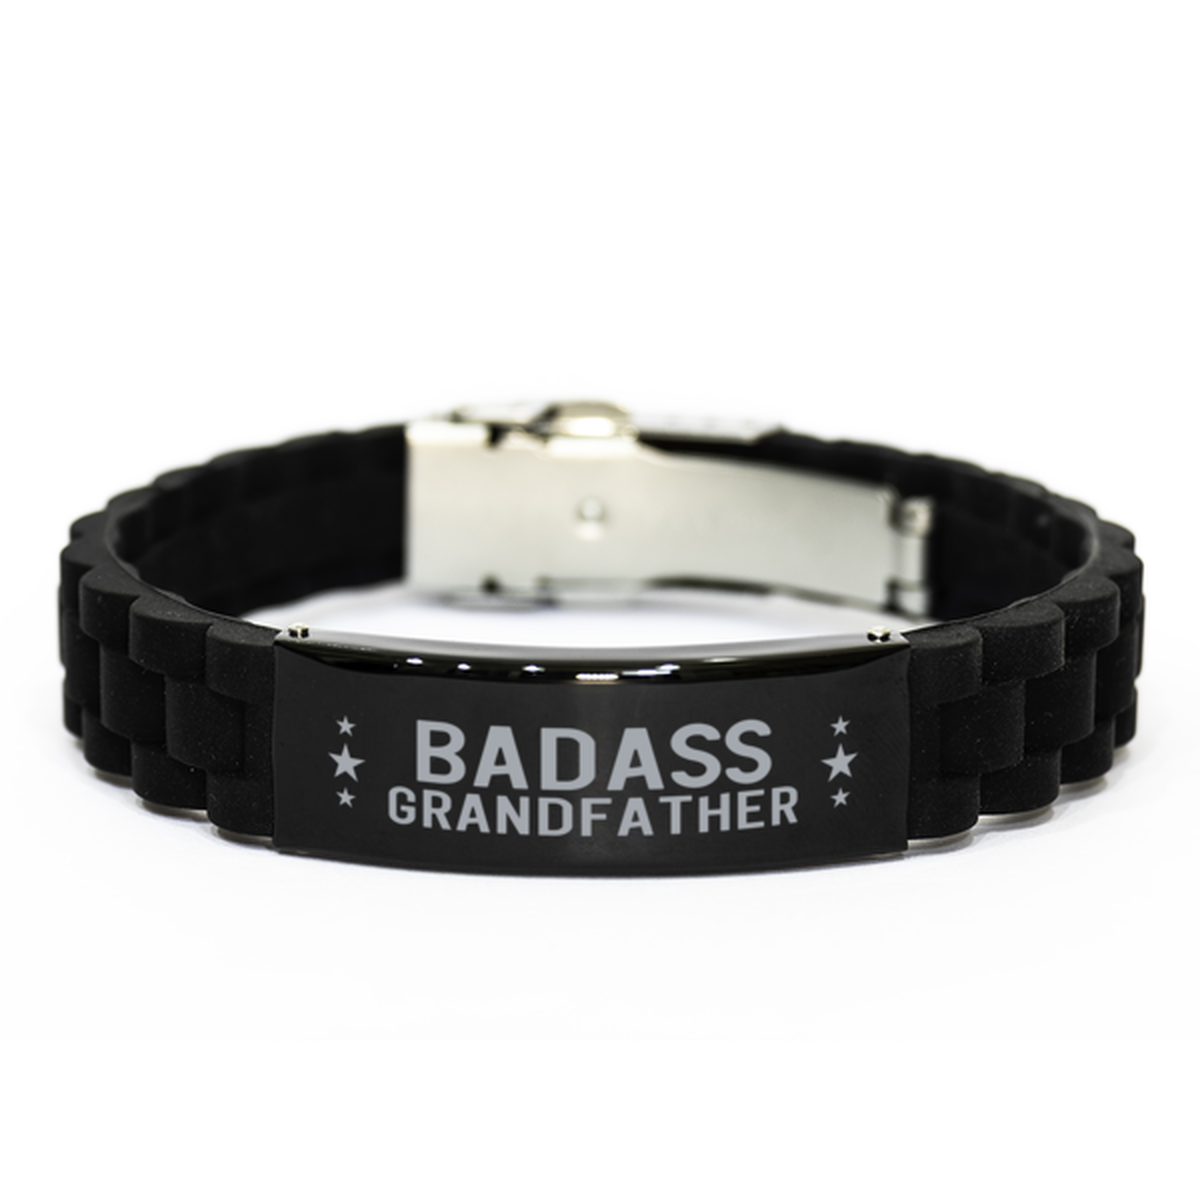 Grandfather Black Bracelet, Badass Grandfather, Funny Family Gifts For Grandfather From Granddaughter Grandson